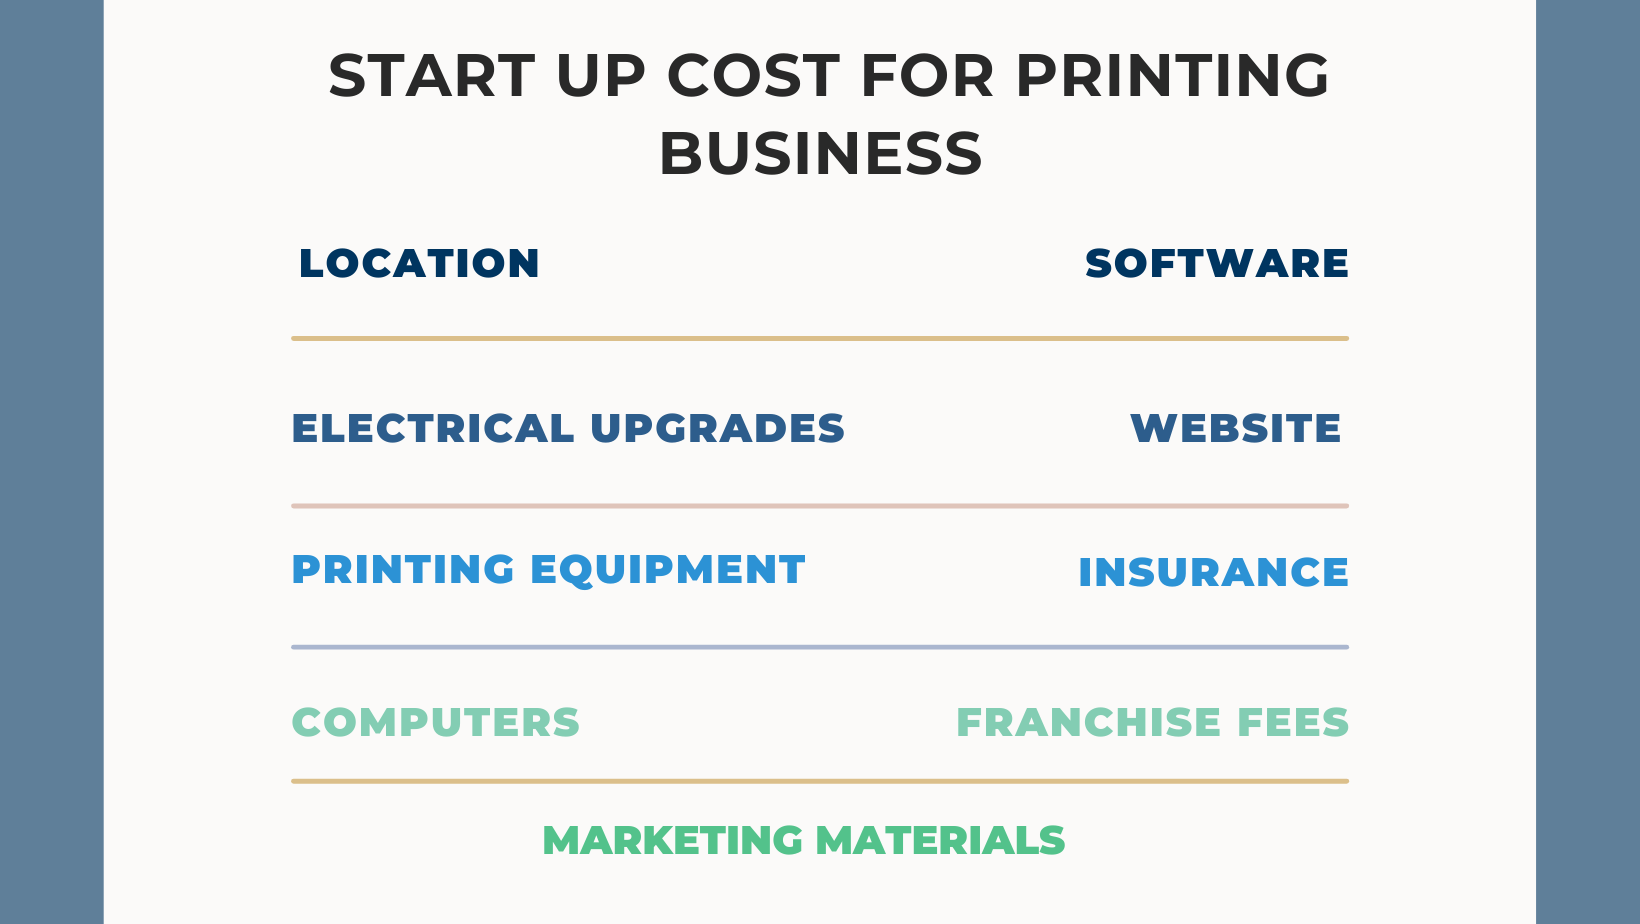 Start_up_cost_for_printing_business.